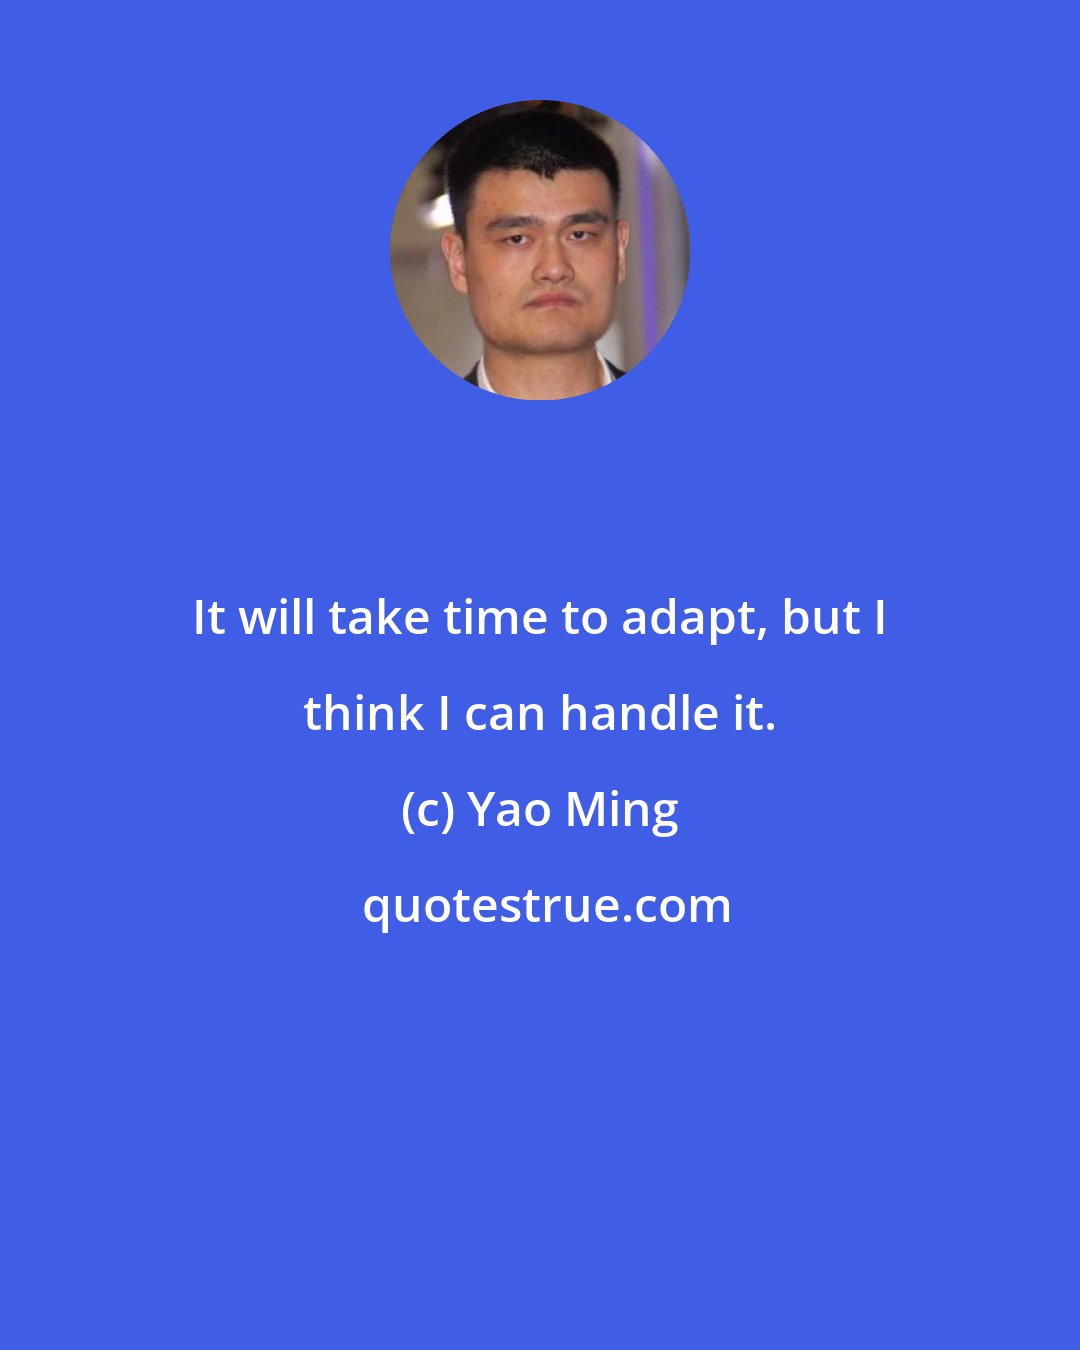 Yao Ming: It will take time to adapt, but I think I can handle it.